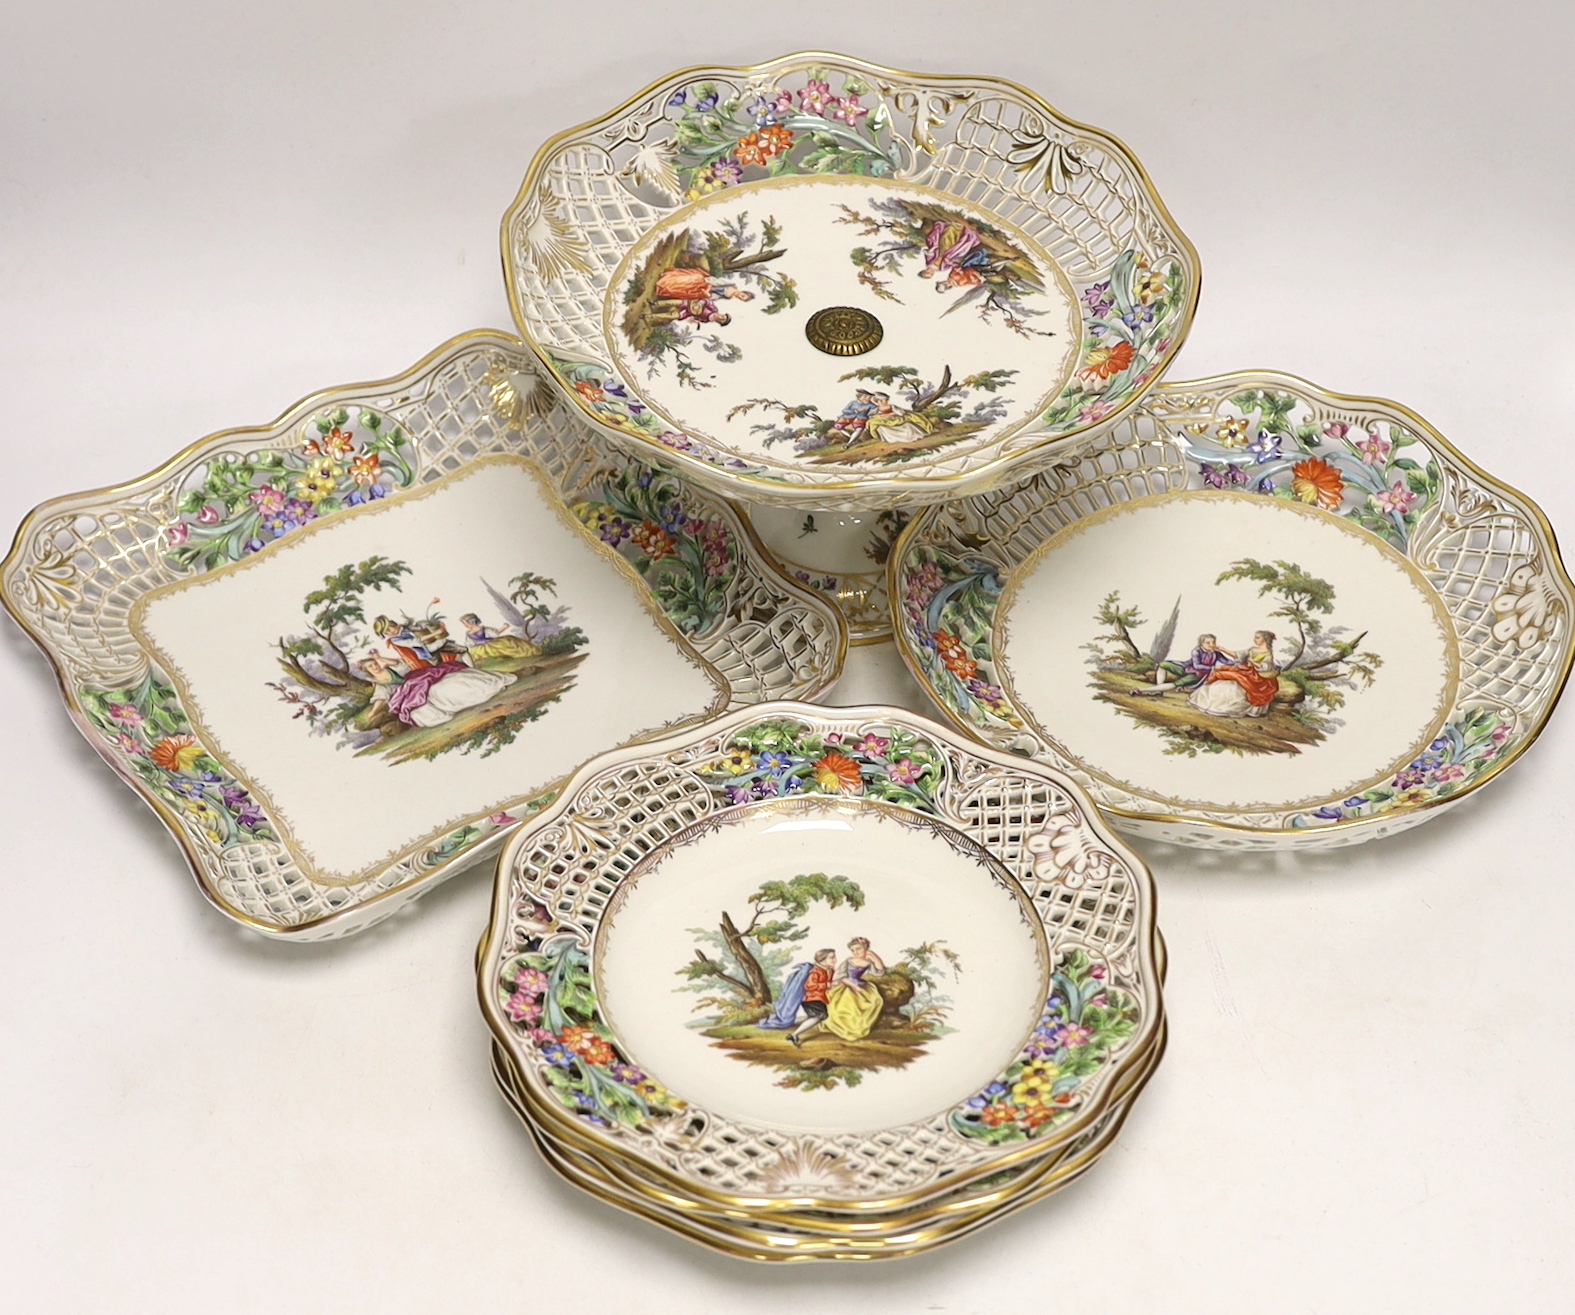 A Dresden Meissen style part dessert set, painted with courting couples in the landscape, consisting of a comport two dishes and four plates, comport 15.5cm high